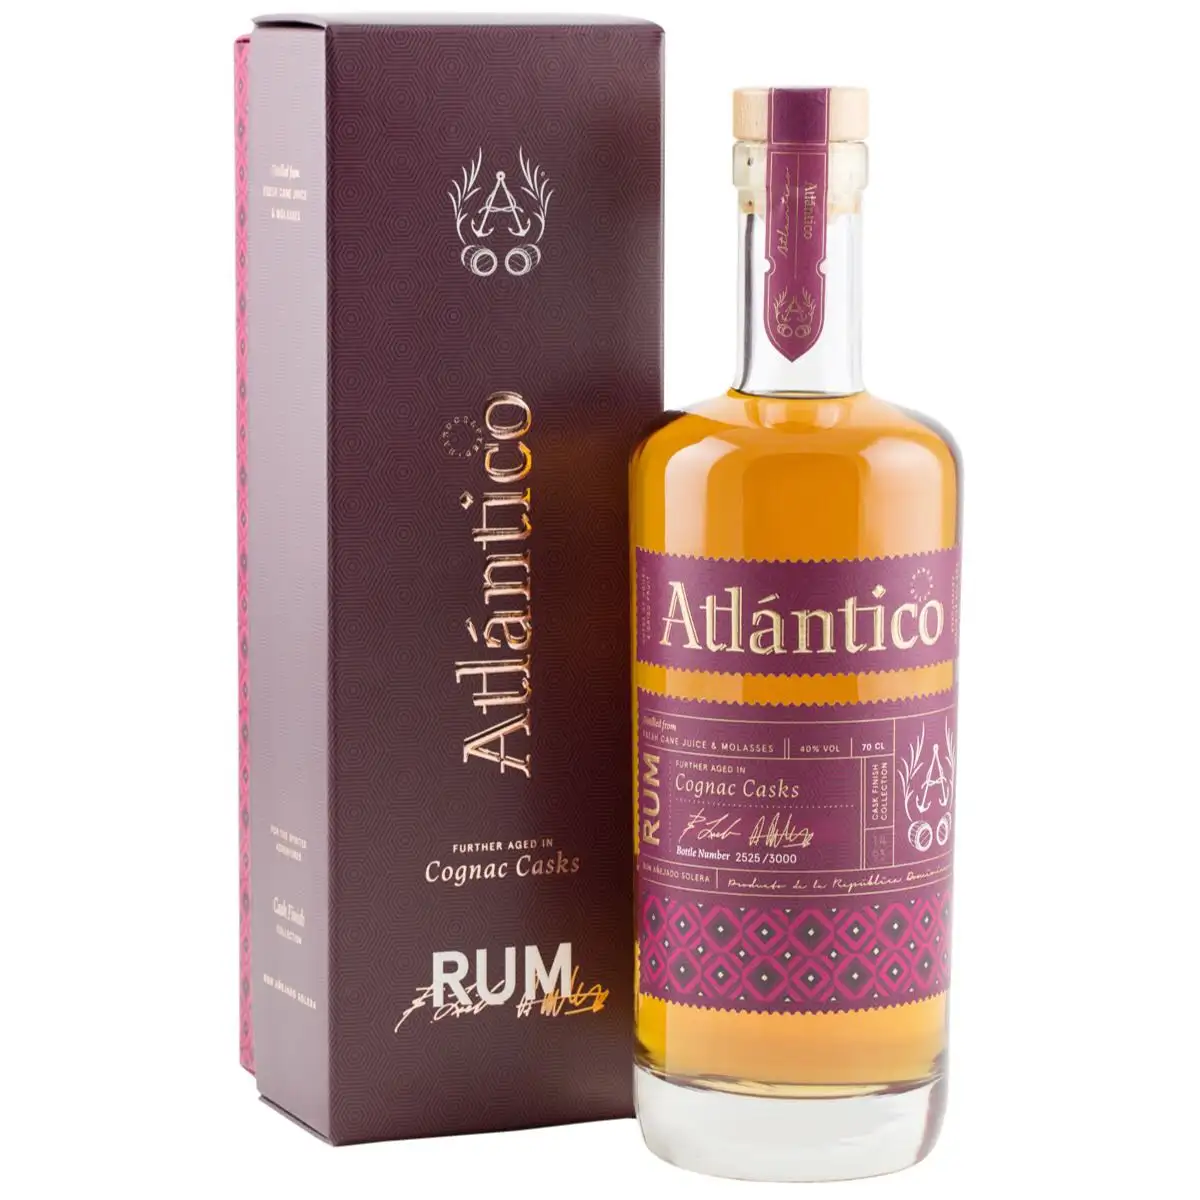 Image of the front of the bottle of the rum Atlantico Cognac Cask